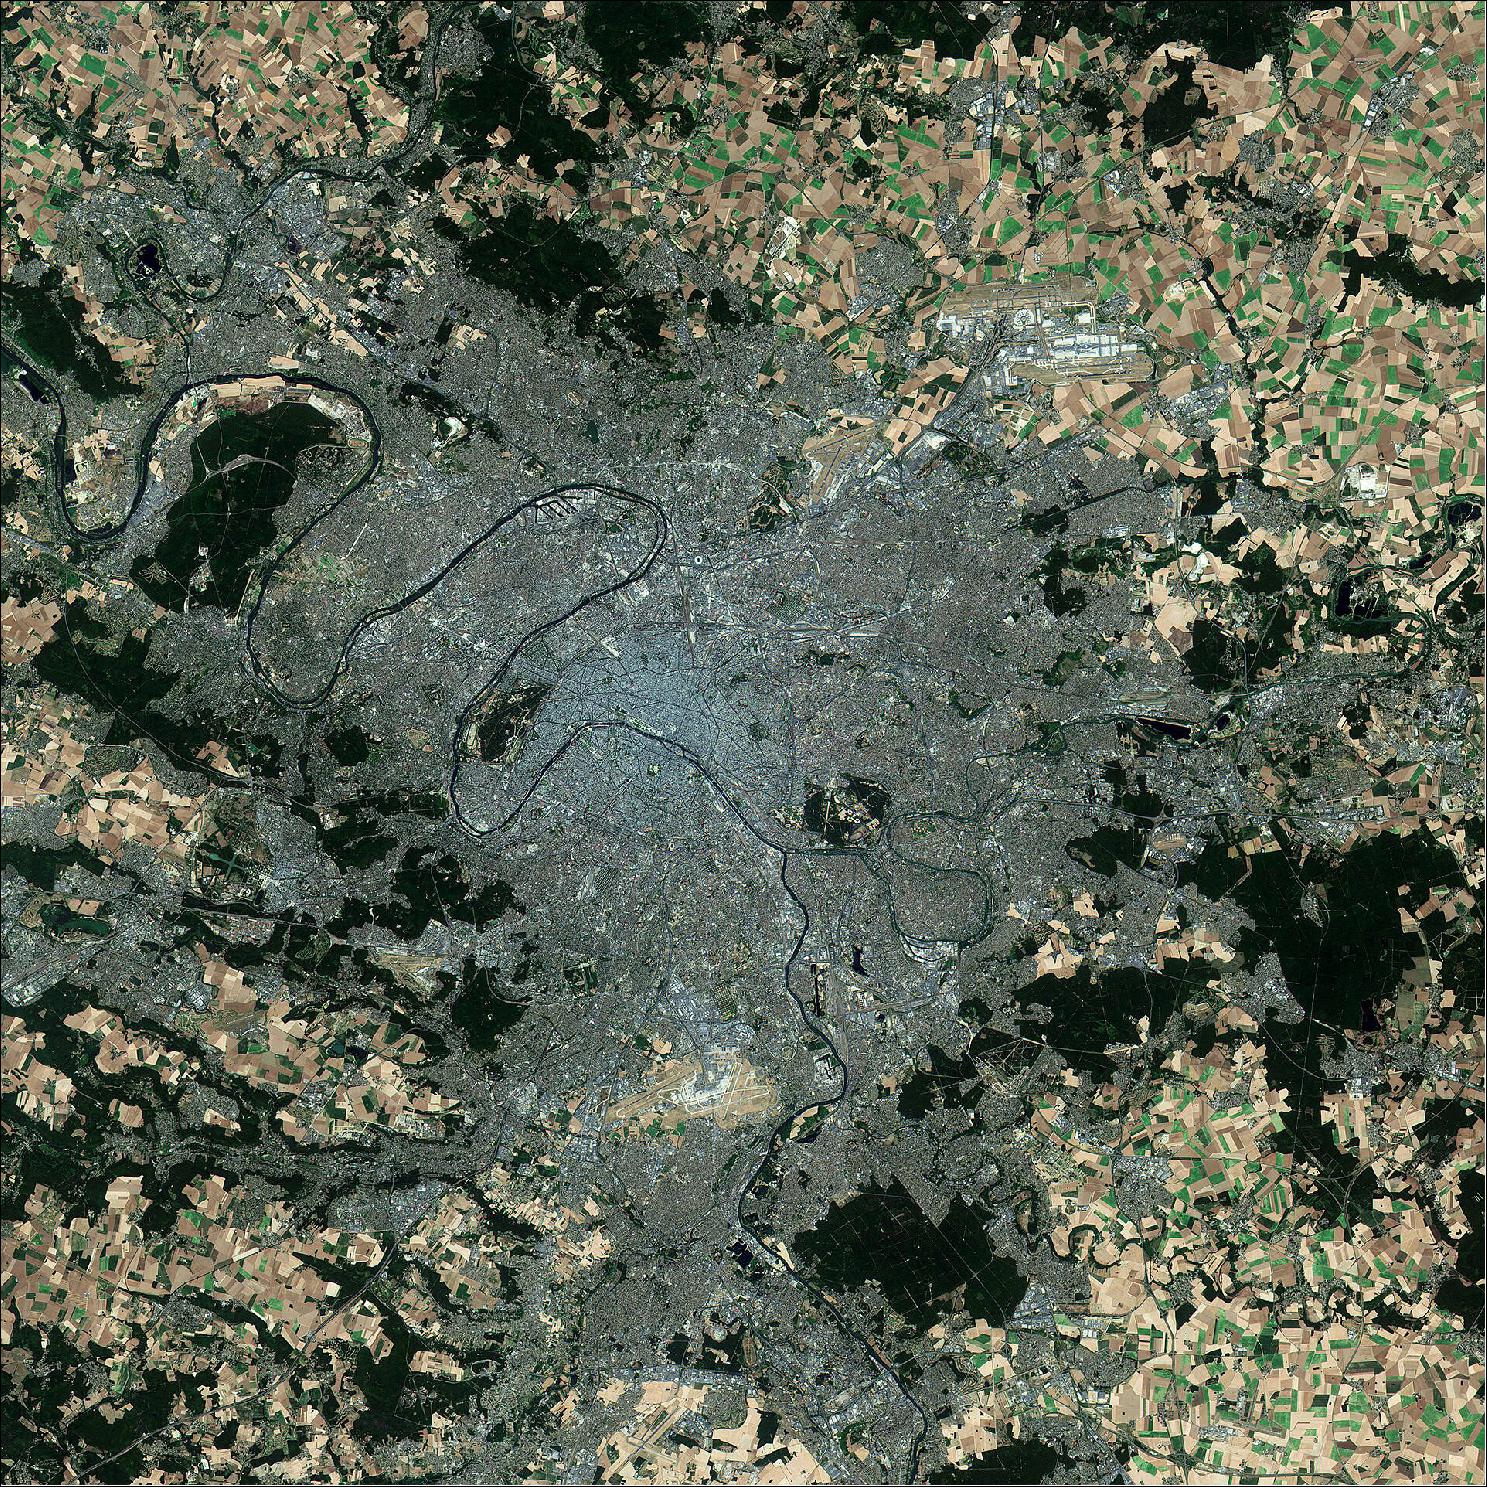 Figure 60: This image of Paris was captured by Sentinel-2A on 15 July 2015. The satellite carries an innovative high-resolution multispectral imager with 13 spectral bands for new perspective of our land and vegetation. It will provide information, for example, for agricultural practices and to help manage food security (image credit: Copernicus Sentinel data (2015)/ESA)